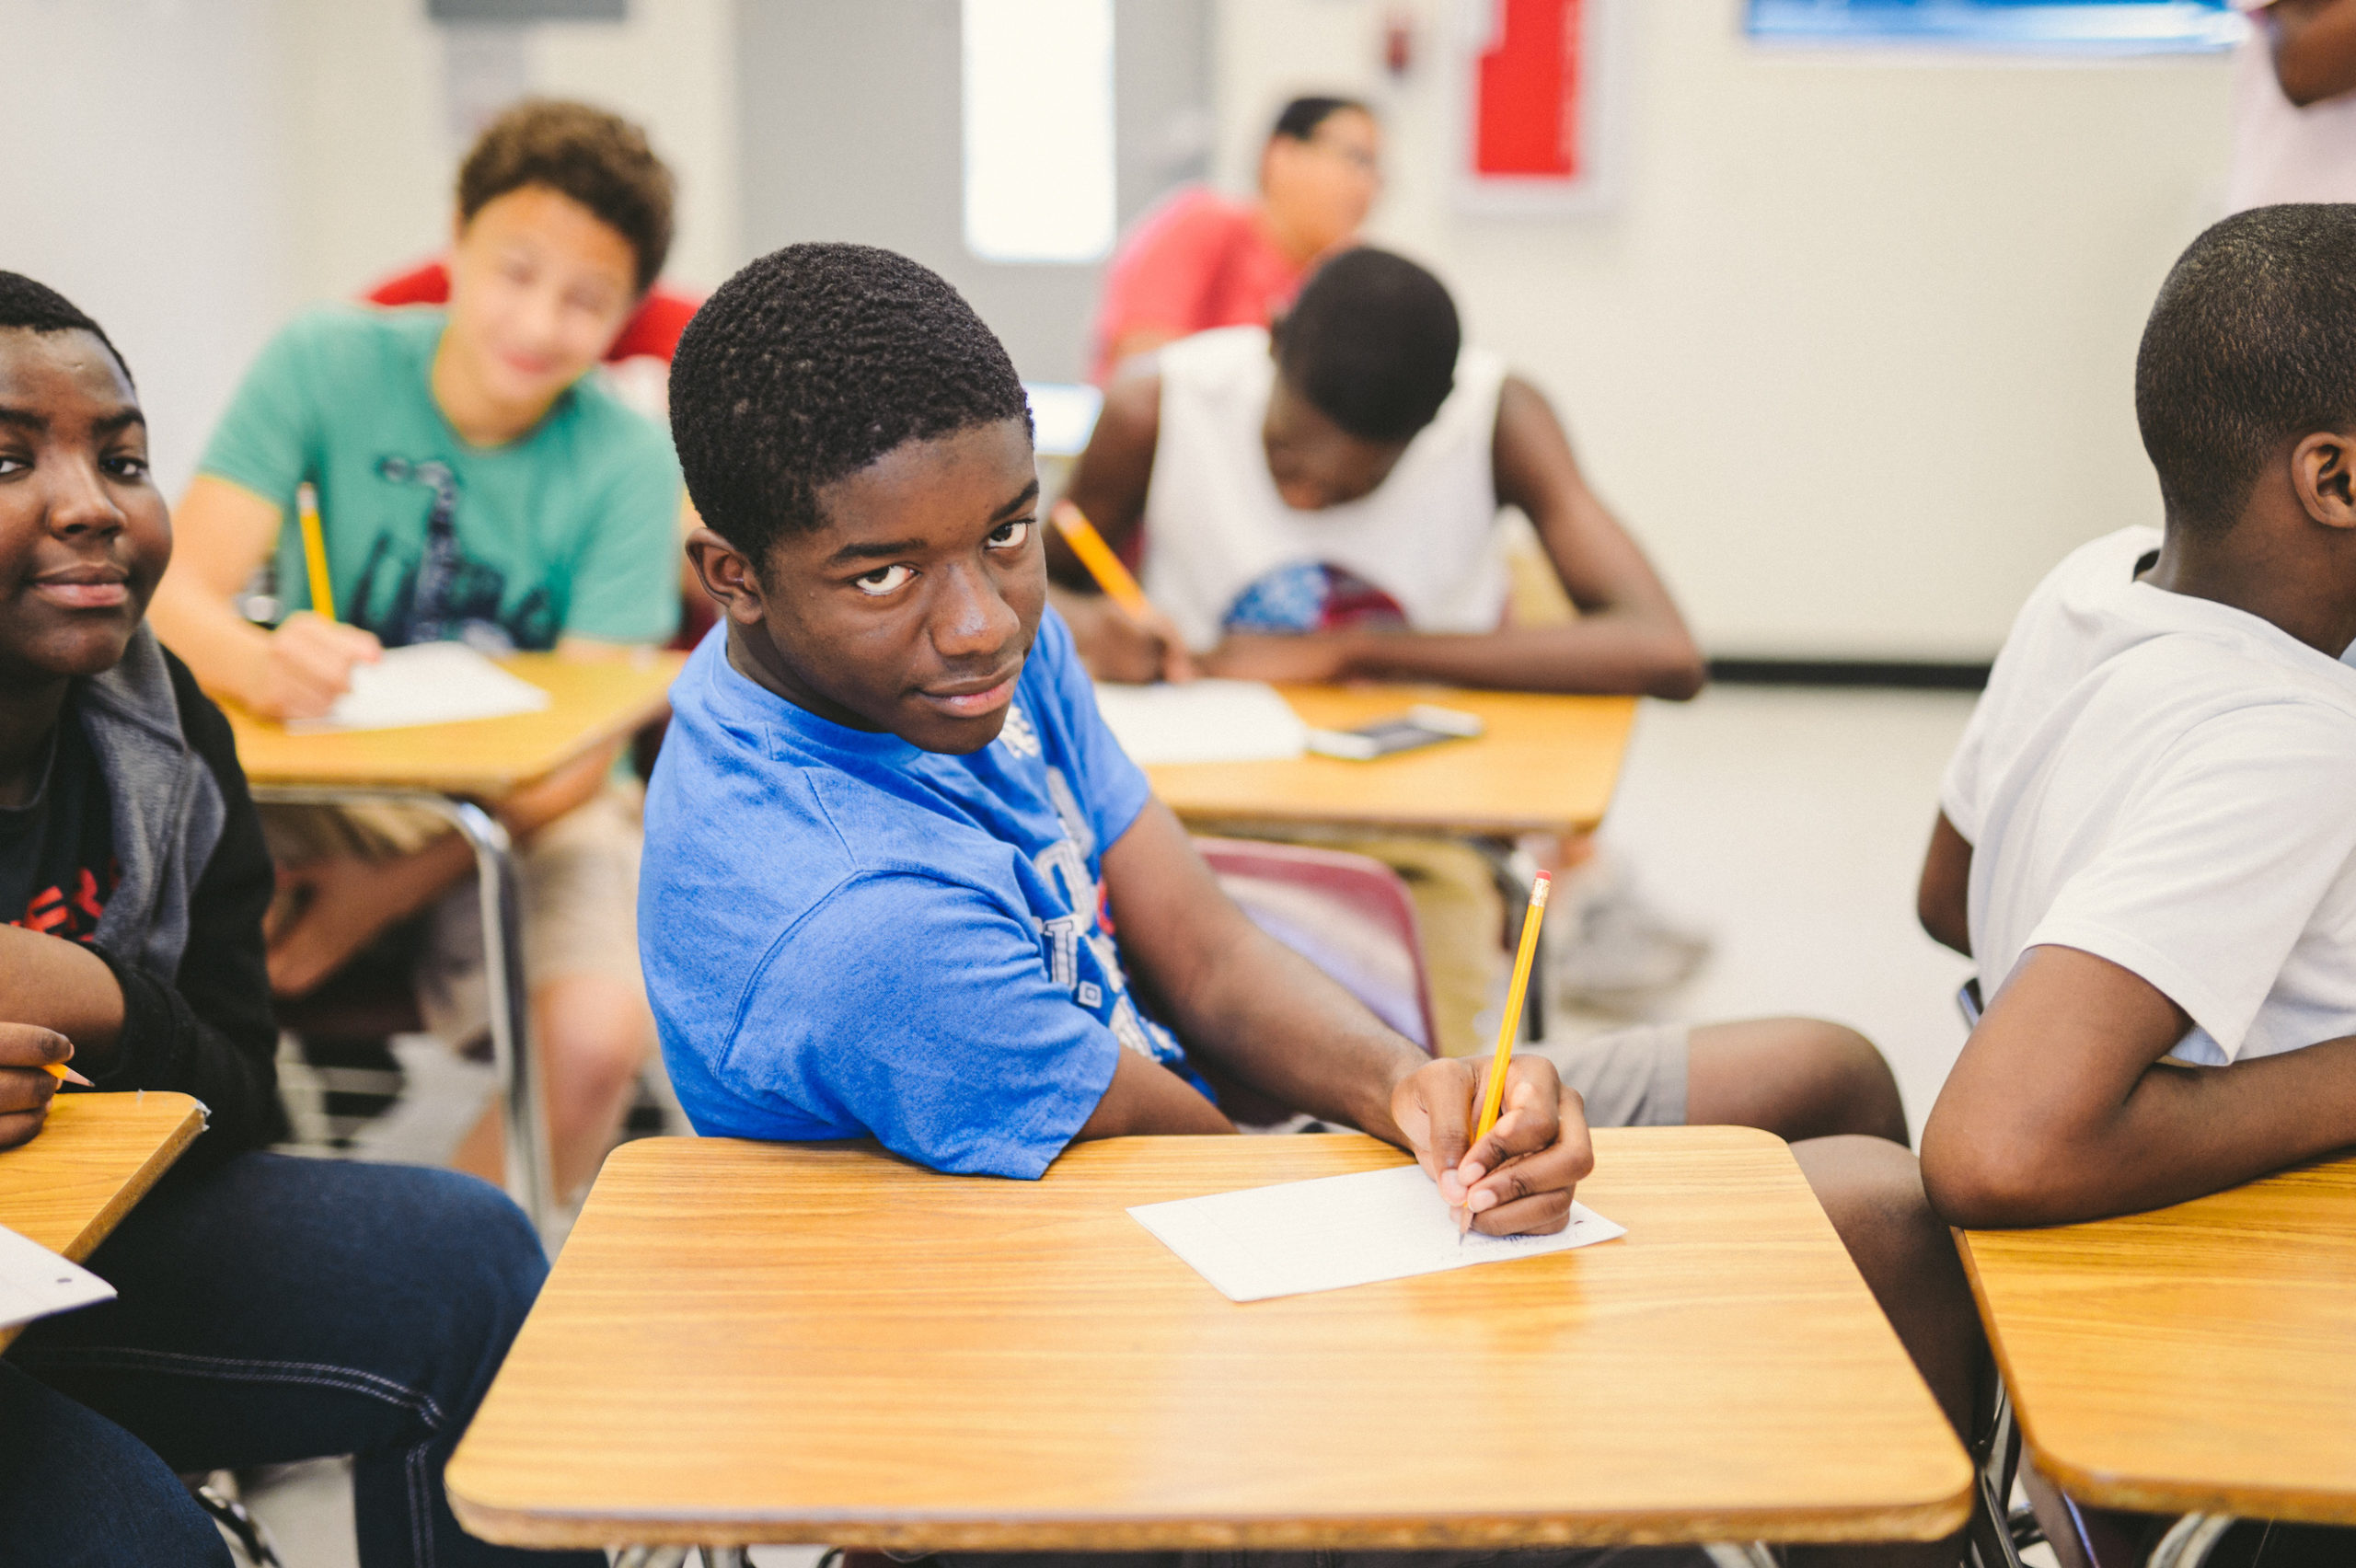 Group of young adults in a classroom with one African American student wearing a blue shirt posing for the camera holding a pencil on a piece of paper